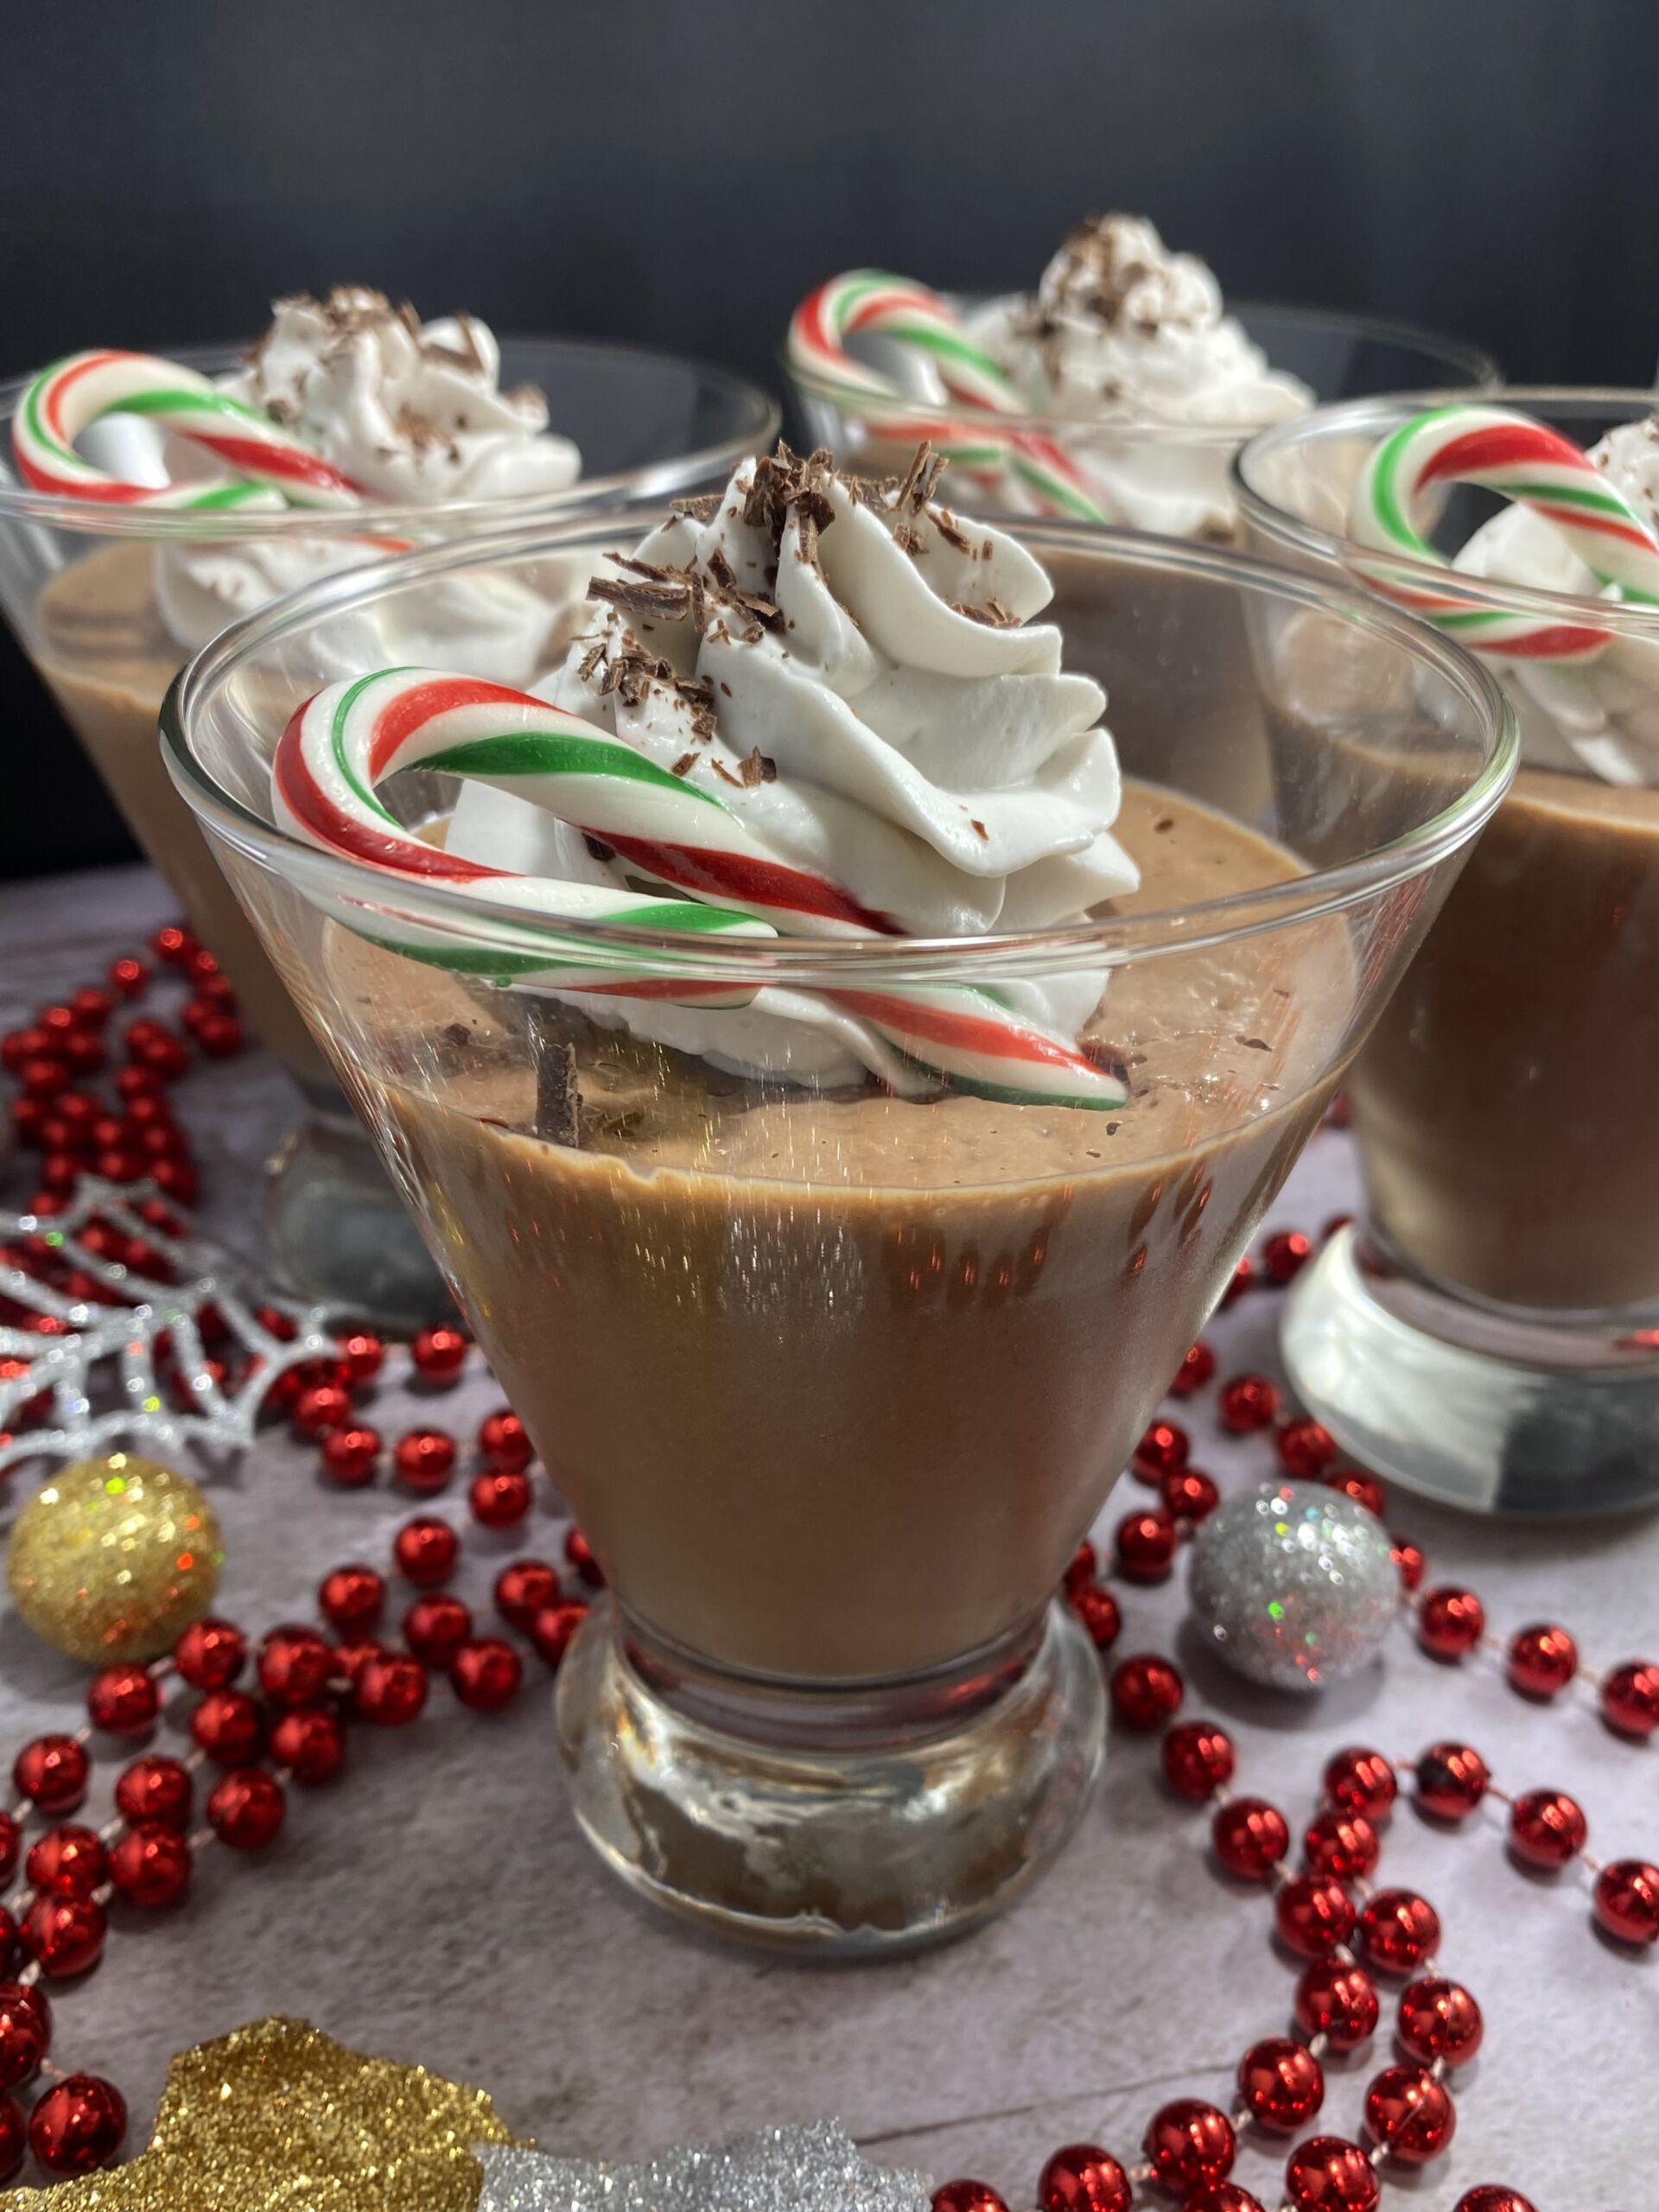 Candy Cane Chocolate Cups filled with Peppermint Mousse